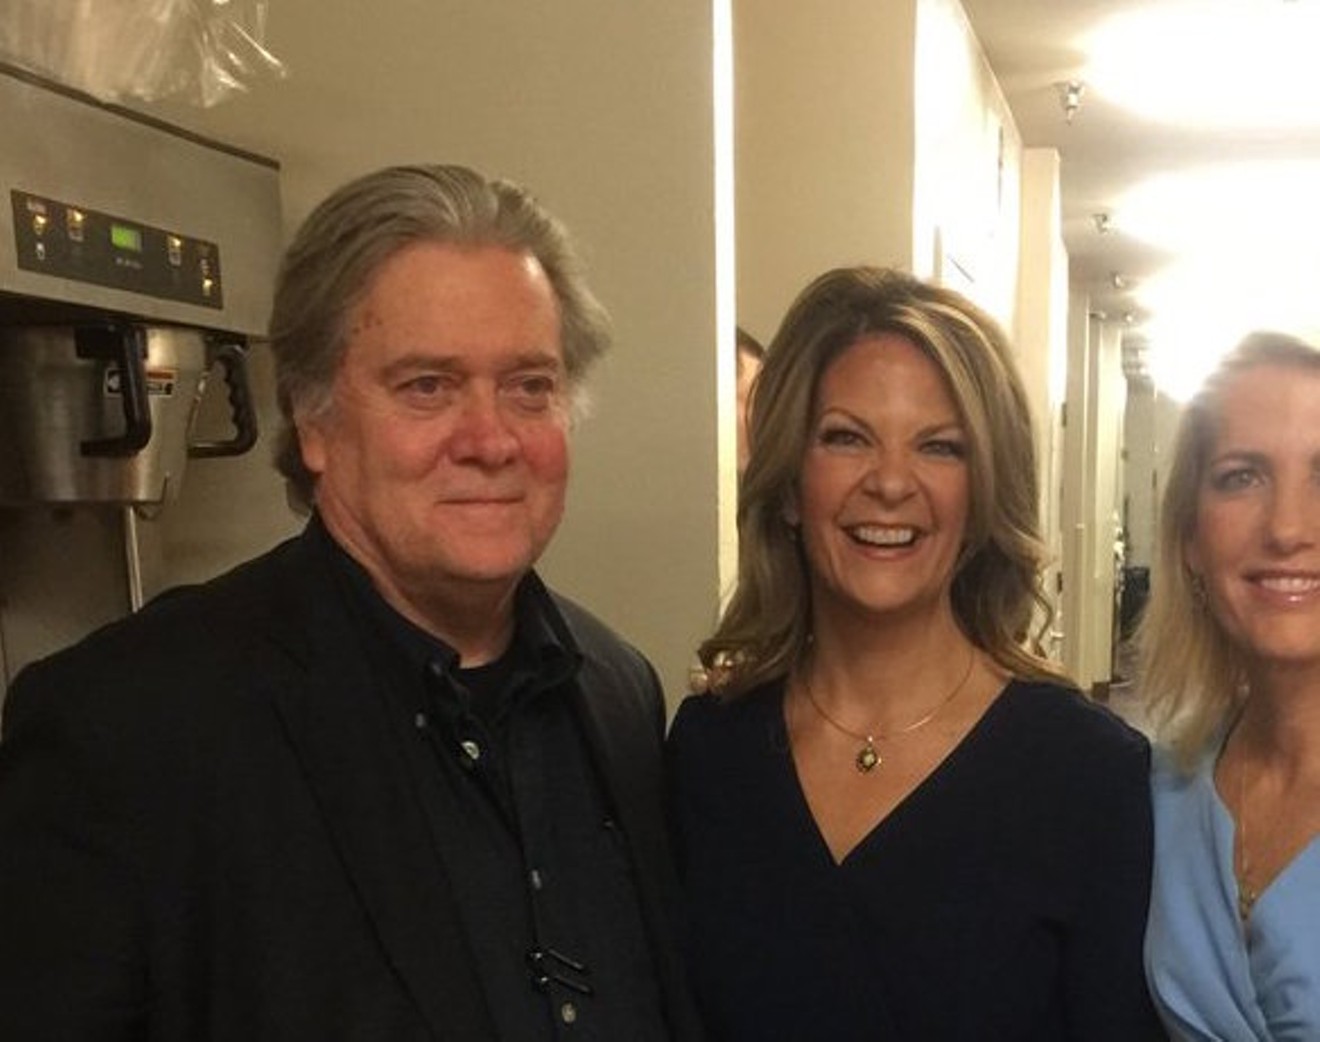 Former Trump adviser Steve Bannon spoke at Kelli Ward's campaign kickoff in October. Now, Ward is downplaying her ties to the former Breitbart chairman.